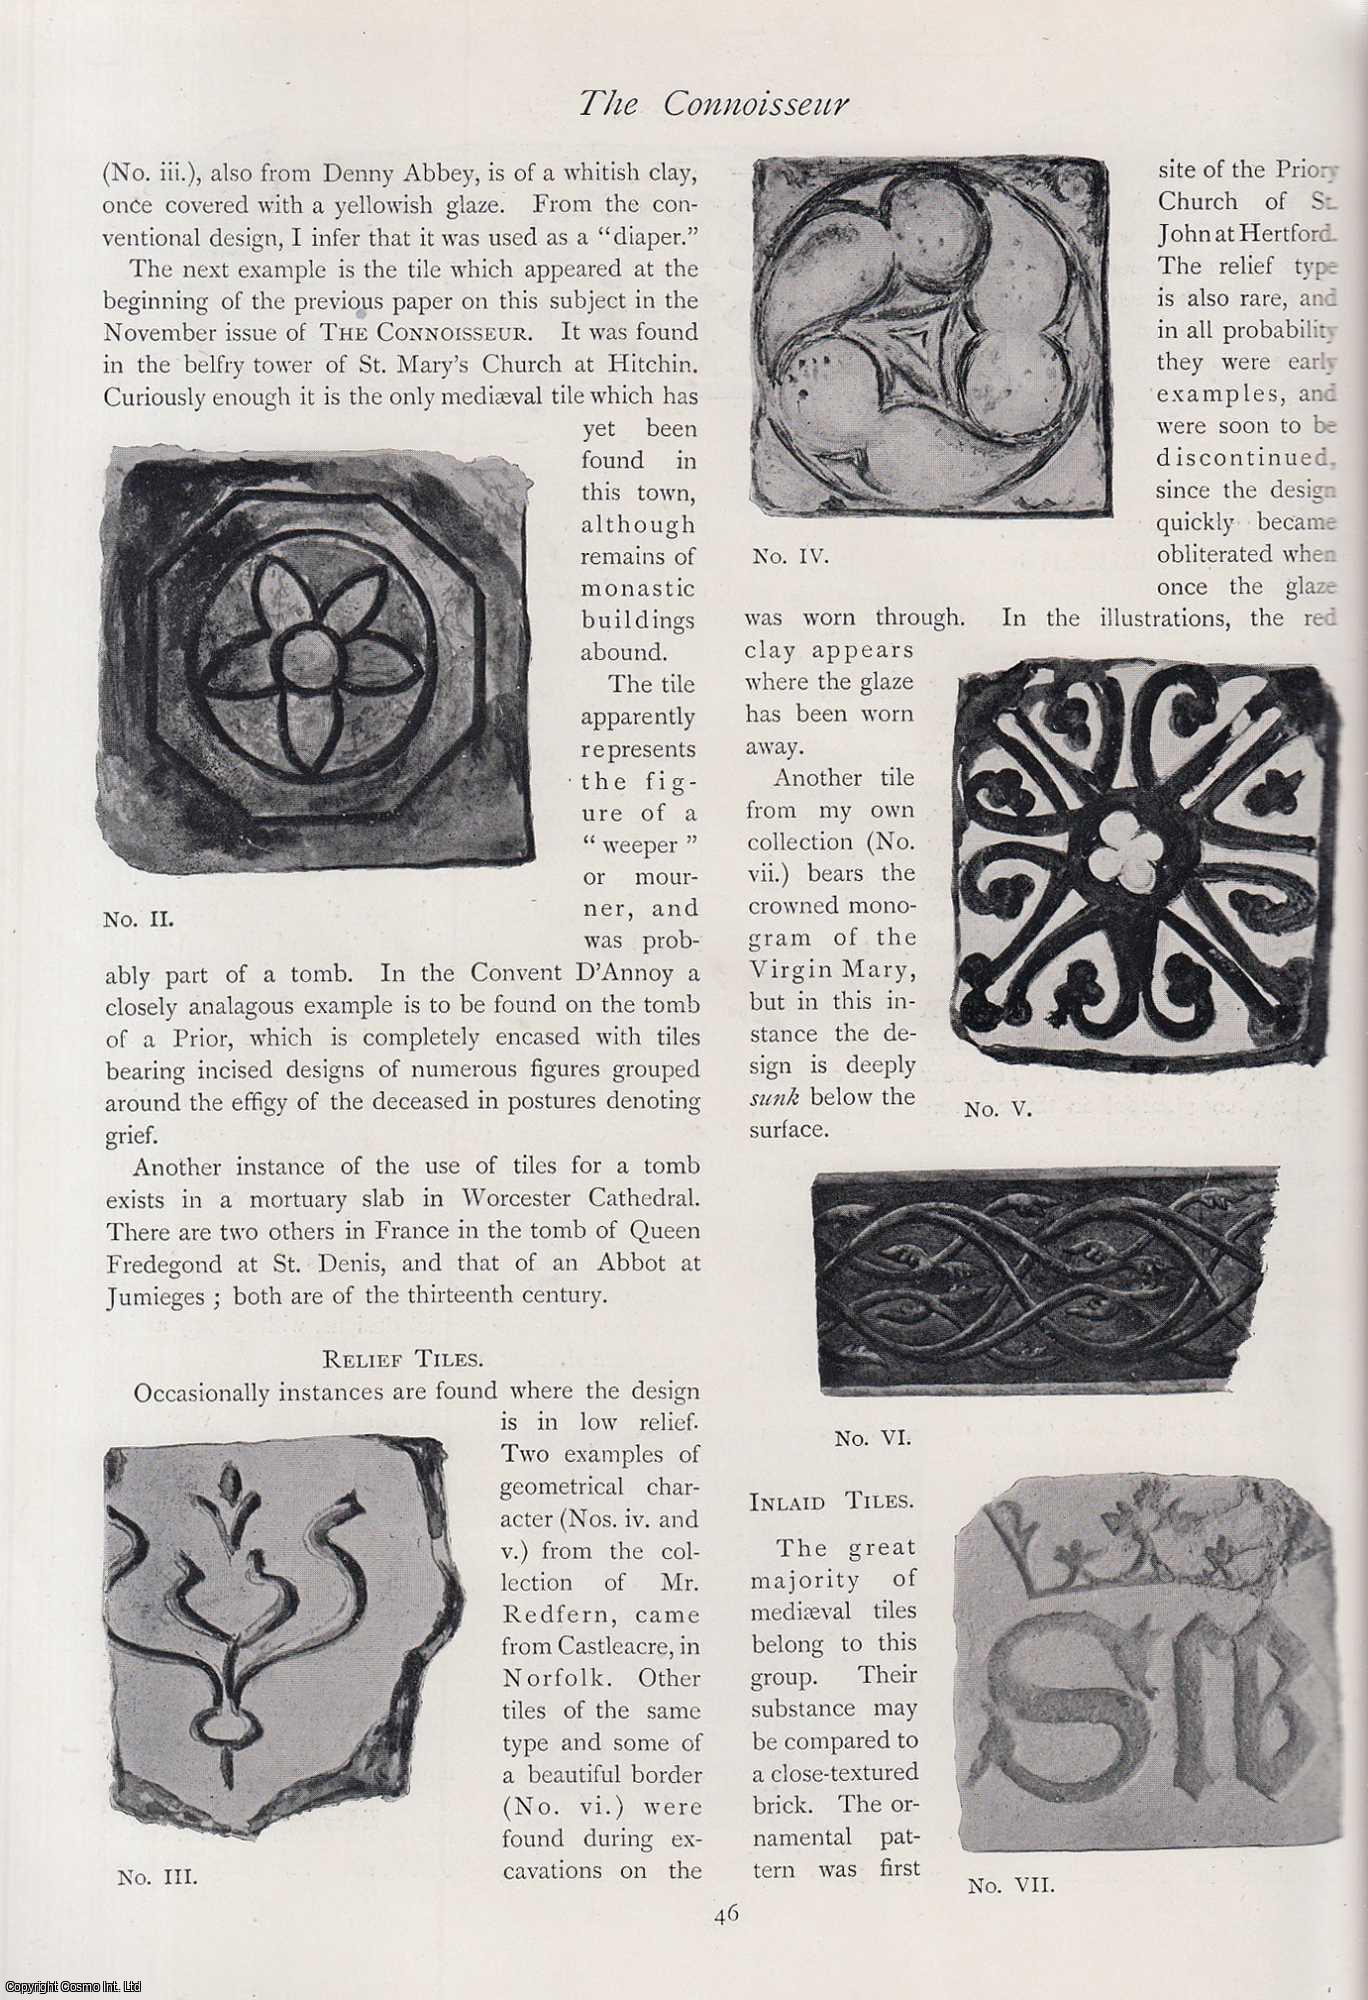 F.W. Phillips - English Mediaeval Tiles. An original article from The Connoisseur, 1904.